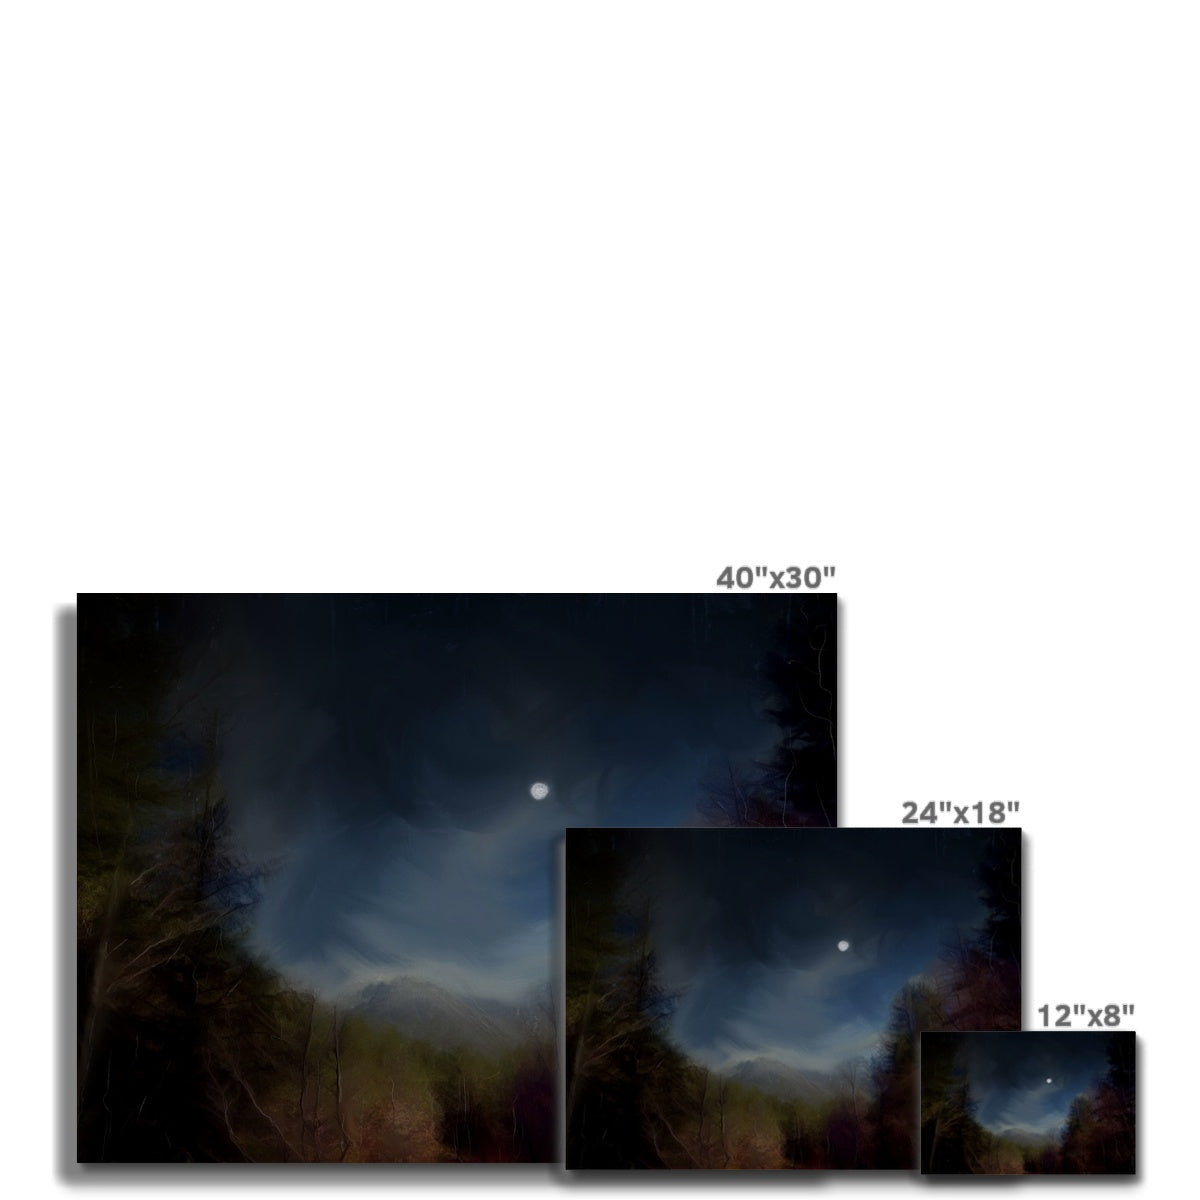 Glencoe Lochan Moonlight Painting | Canvas From Scotland-Contemporary Stretched Canvas Prints-Scottish Lochs & Mountains Art Gallery-Paintings, Prints, Homeware, Art Gifts From Scotland By Scottish Artist Kevin Hunter